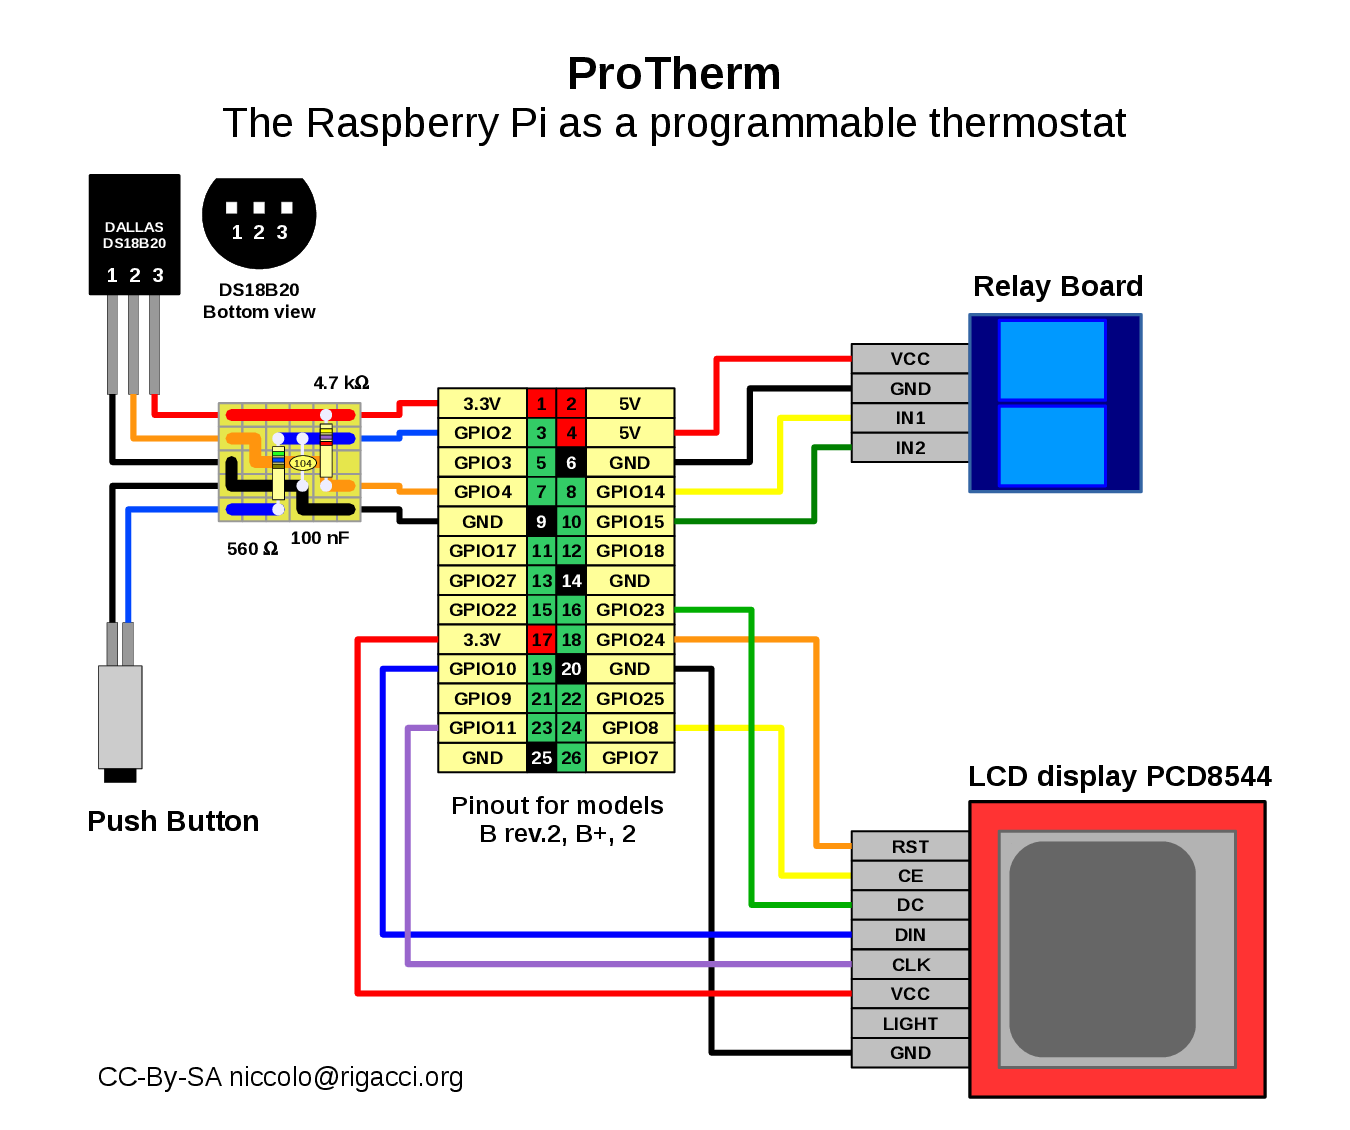 protherm-schematic.png